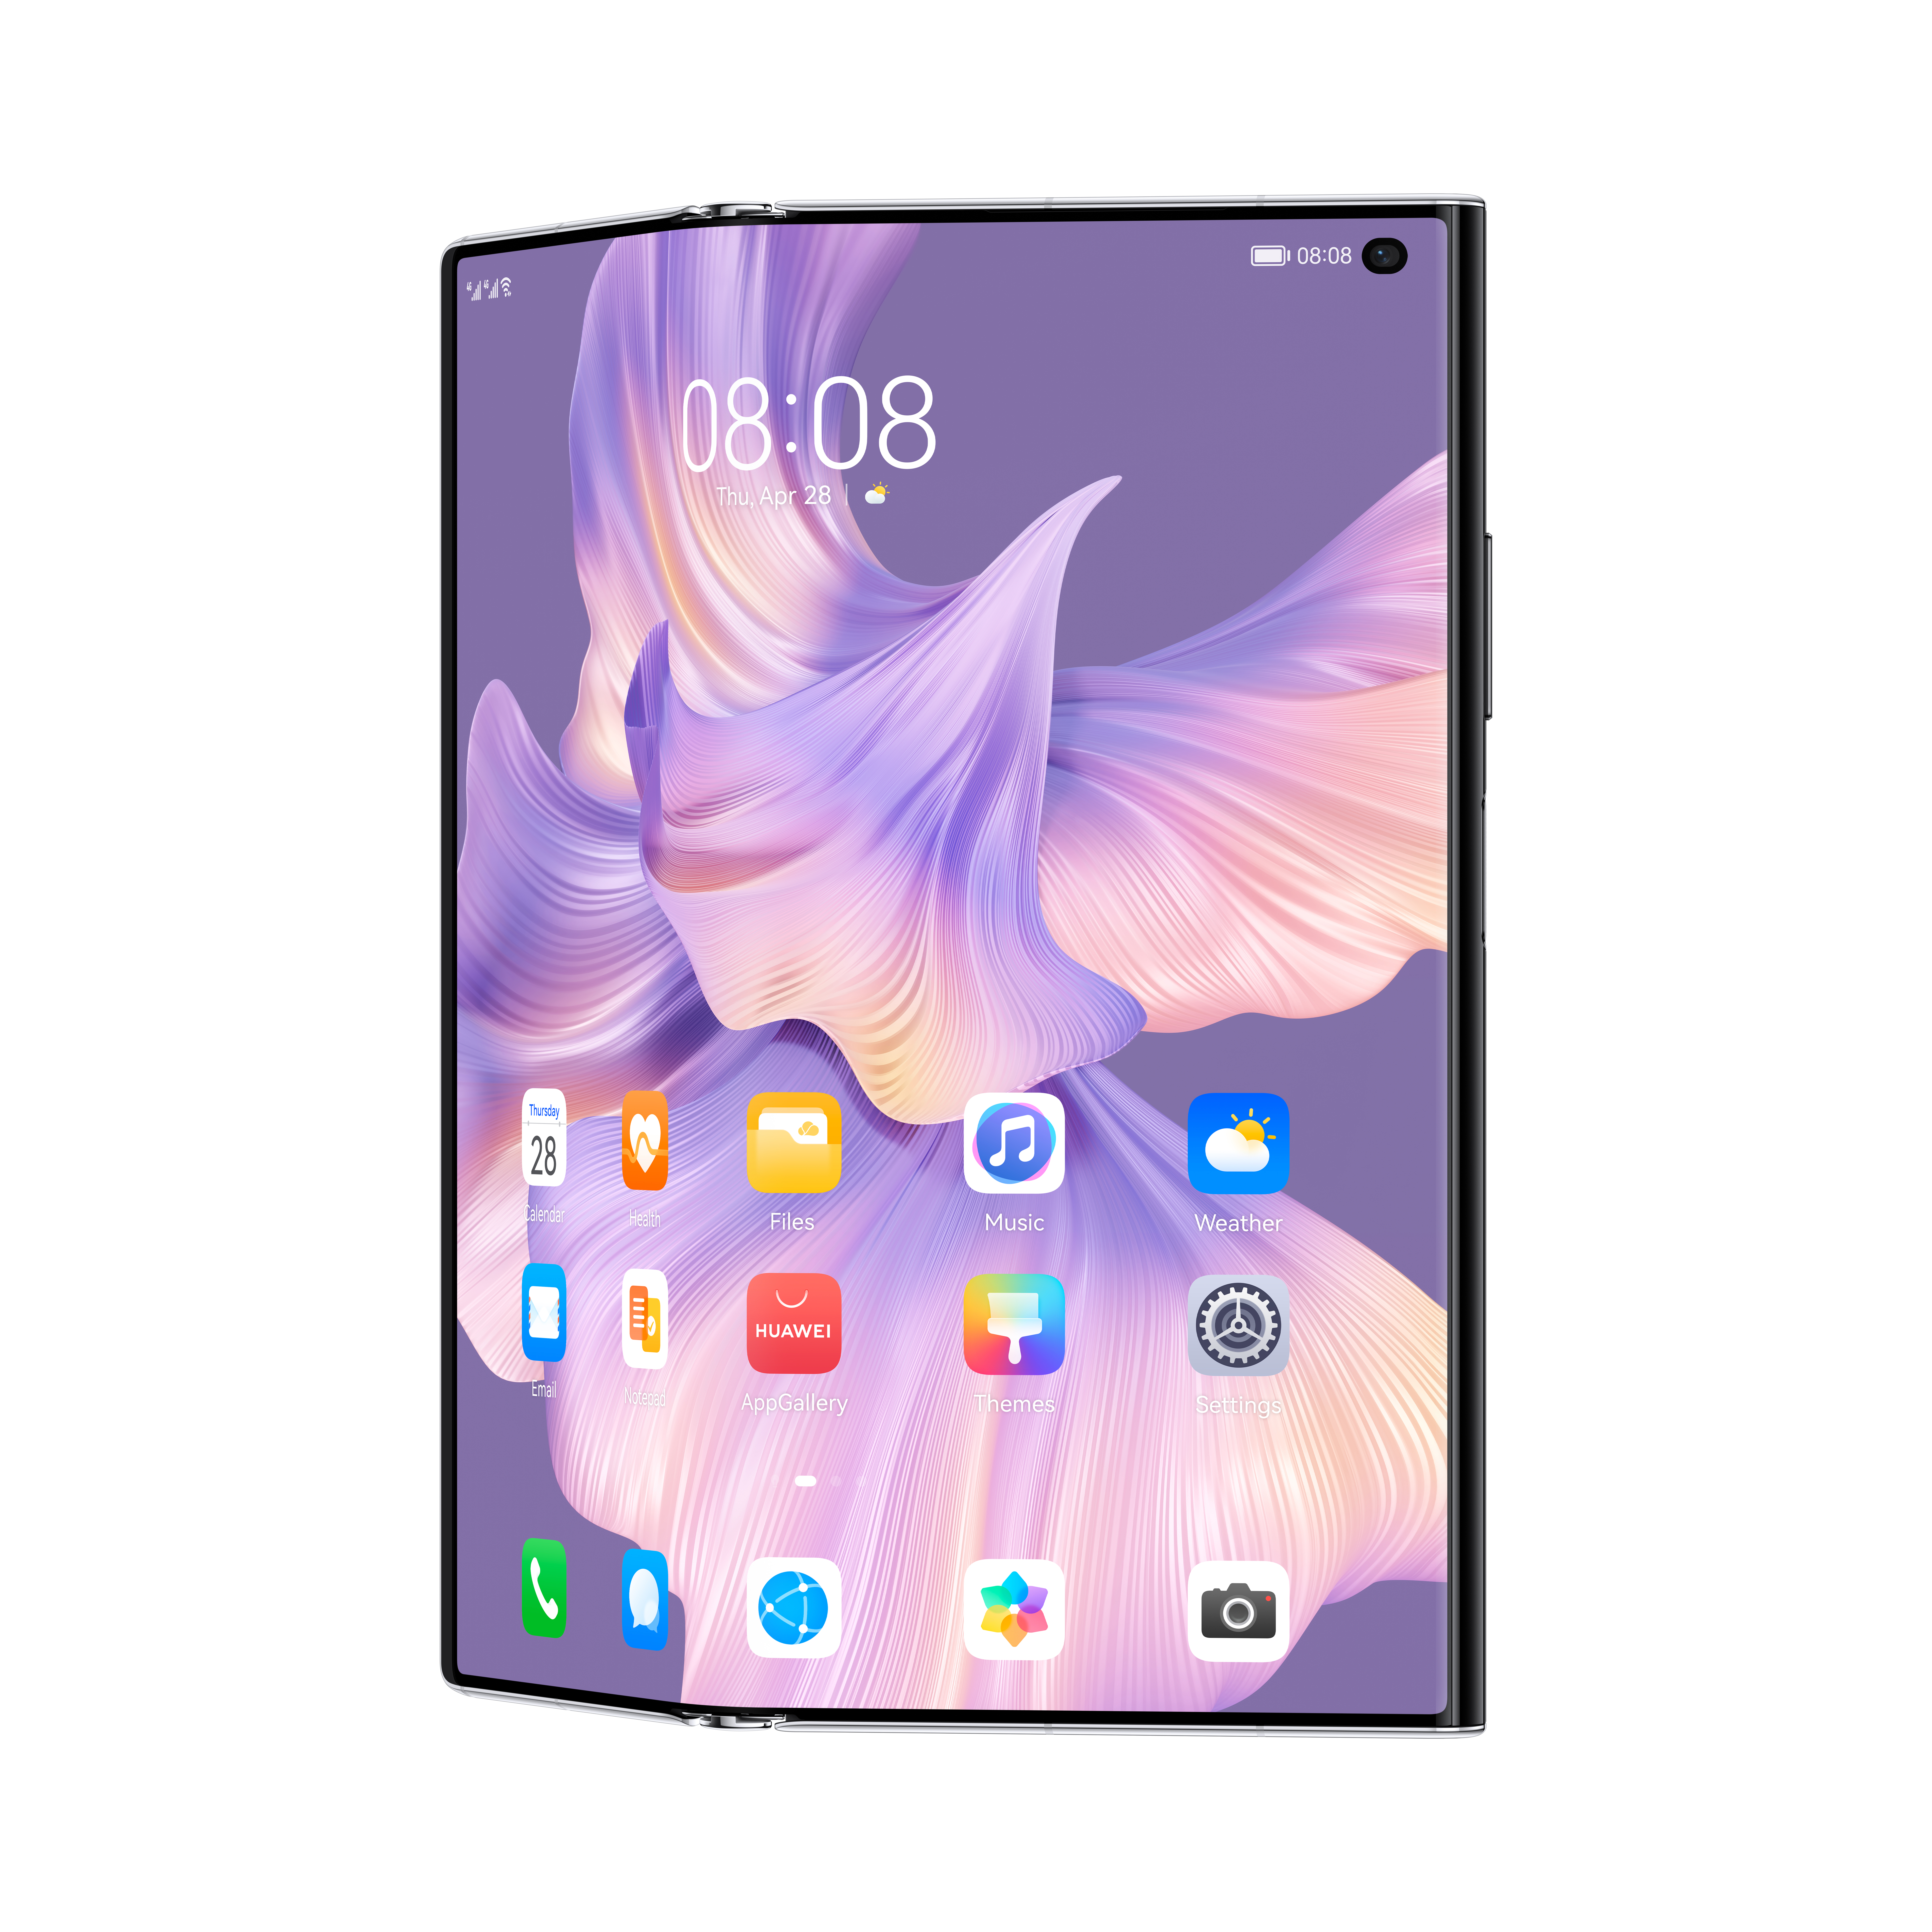 Huawei’s latest new foldable smartphone Mate Xs 2 coming to the UK